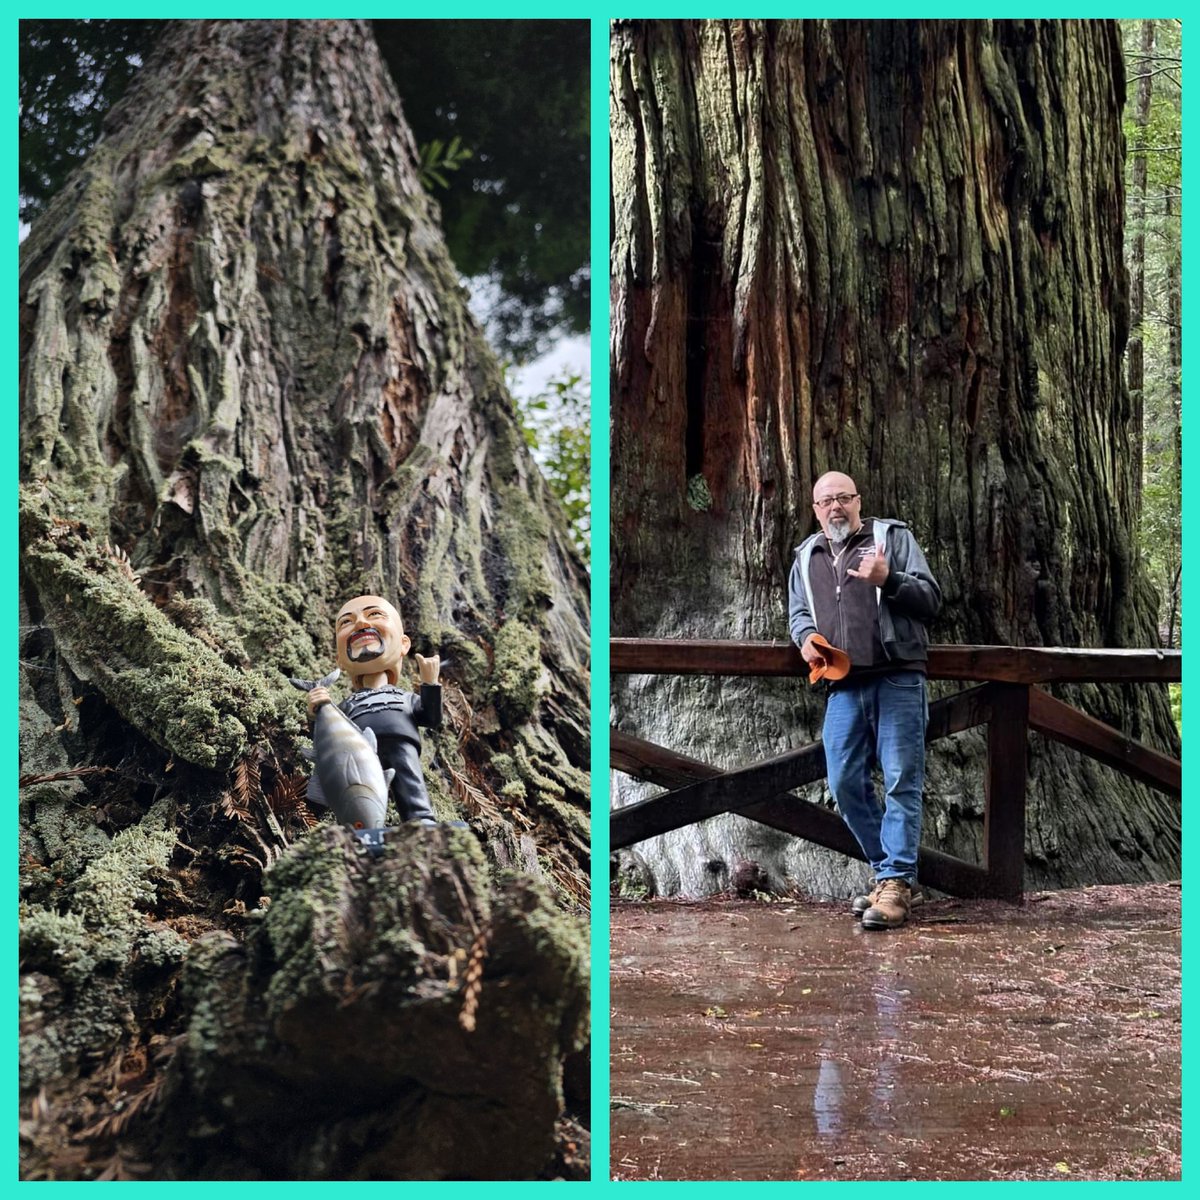 Welcome Bobble Head Dave to my redwoods.. ♡tx @HardmerchNancy  
One more pic in my comments..
#wickedtuna @CaptMarciano